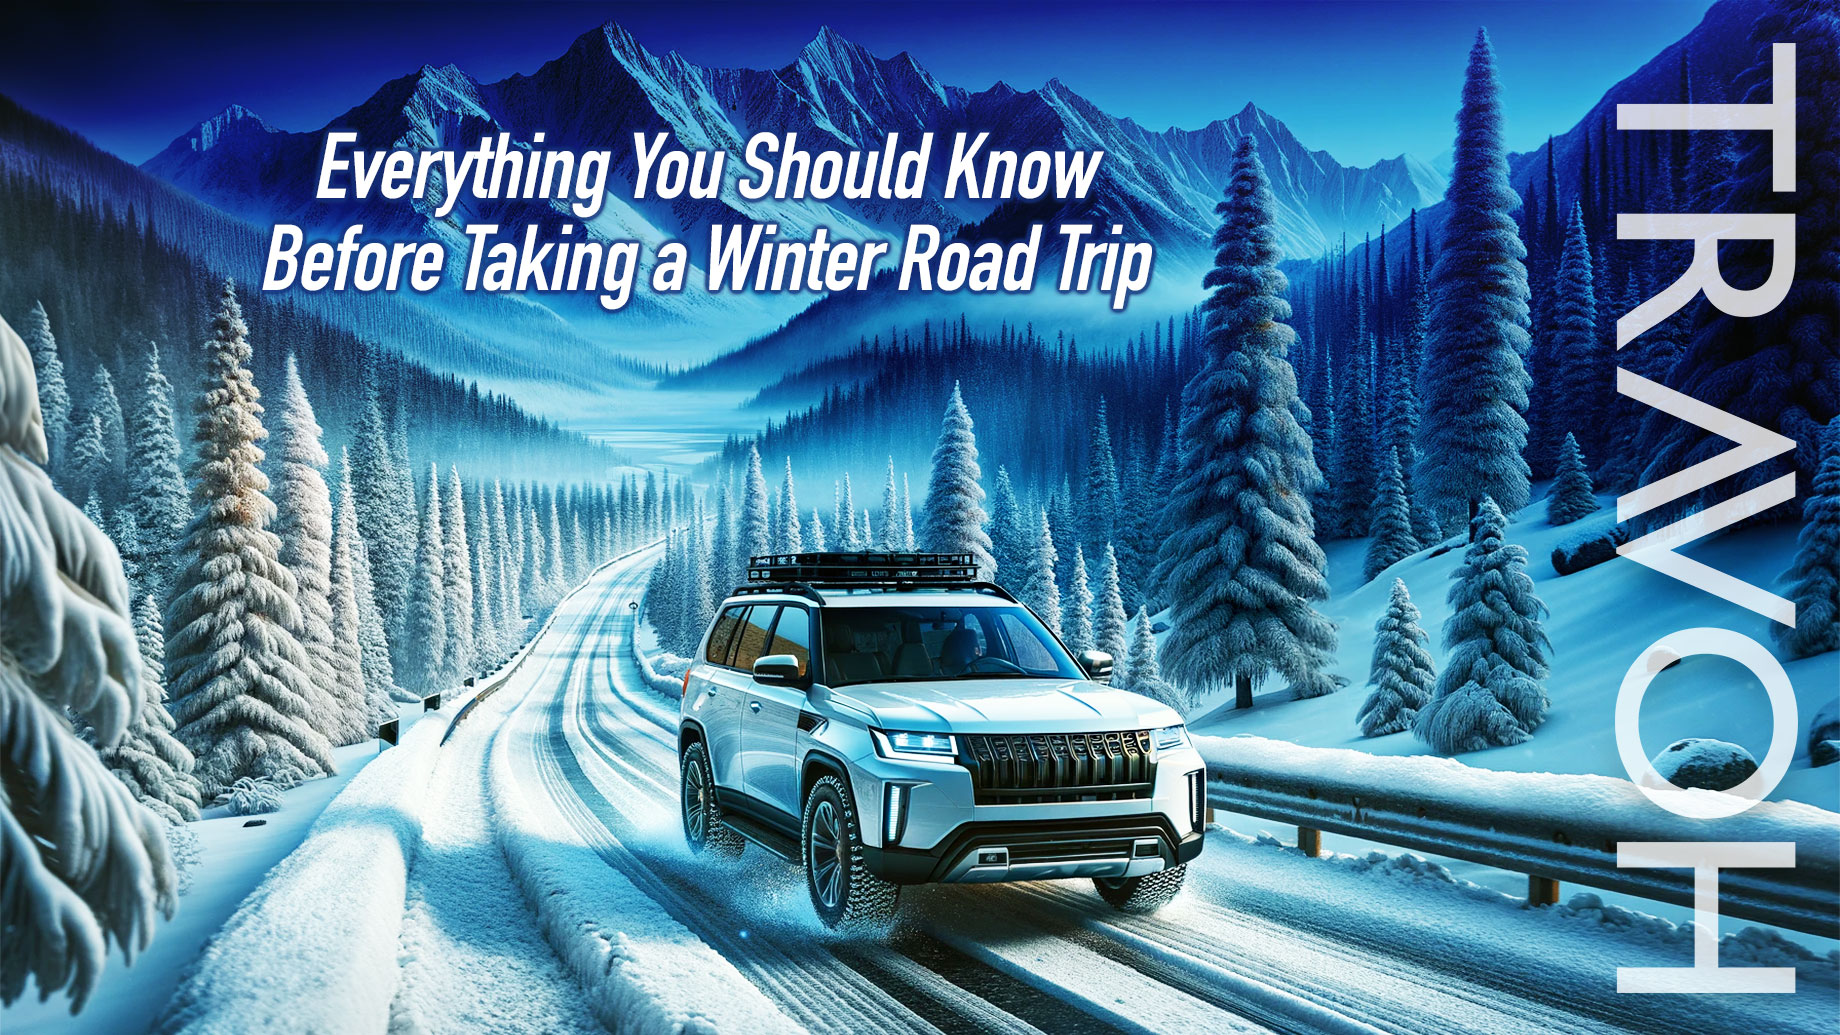 Everything You Should Know Before Taking a Winter Road Trip